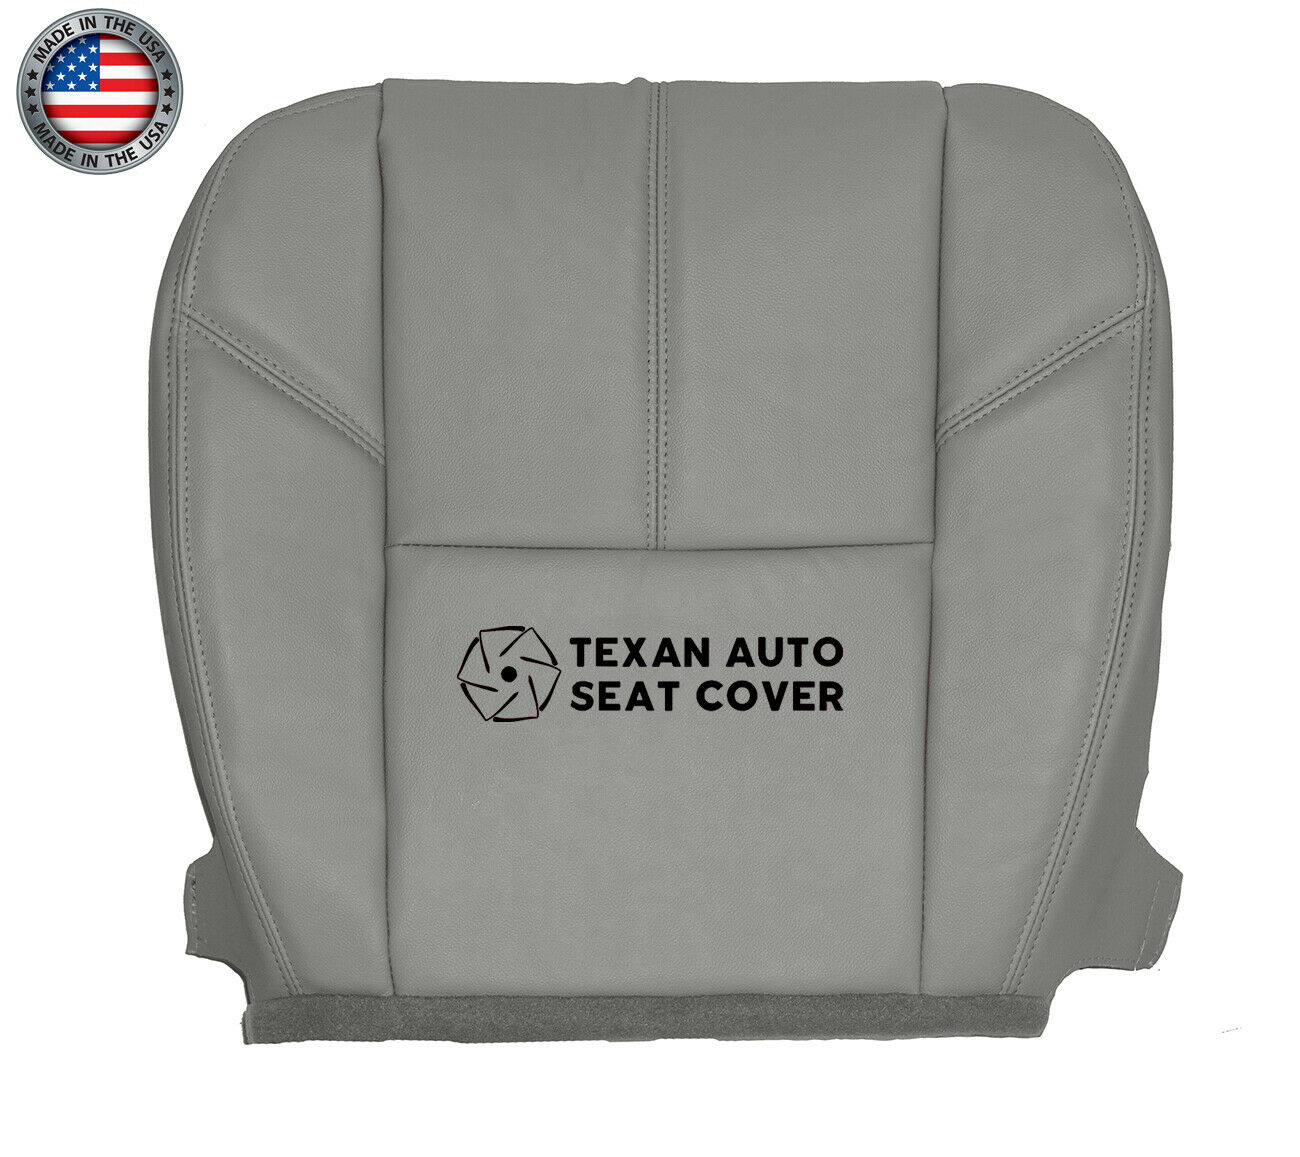 Fits 2007, 2008, 2009, 2020, 2011, 2012, 2013 Chevy Avalanche Passenger Side Bottom Leather Replacement Seat Cover Gray